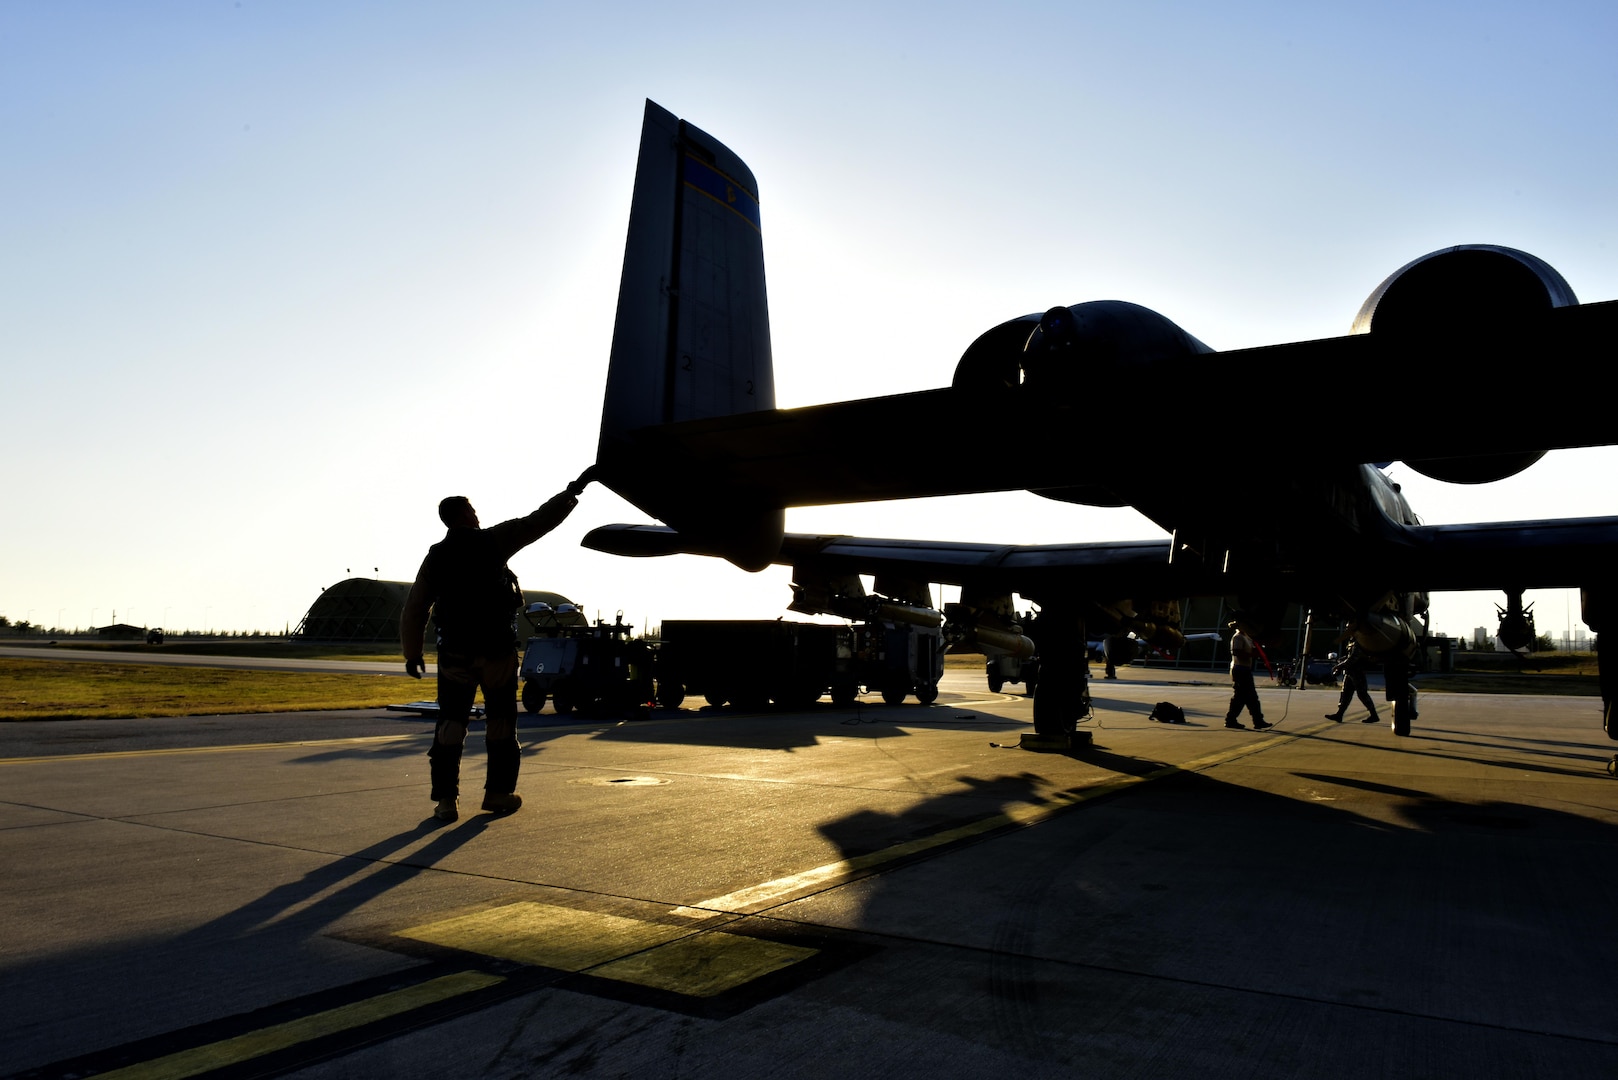 Lt. Col. Ben Rudolphi, 407th Expeditionary Operation Support Squadron commander, conducts a preflight check on an A-10 Thunderbolt II July 11, 2017, at Incirlik Air Base, Turkey. Rudolphi has provided a dual role in Operation INHERENT RESOLVE as the commander of the 407th EOSS in Southwest Asia and being directly in the fight against ISIS conducting A-10 flying missions with the 447th Air Expeditionary Group.The A-10 supports ground forces with rapid employment close air and contact support. It utilizes a variety of bomb, missiles and a 30mm GAU-8 seven-barrel Gatling gun. (U.S. Air Force photo by Senior Airman Ramon A. Adelan)